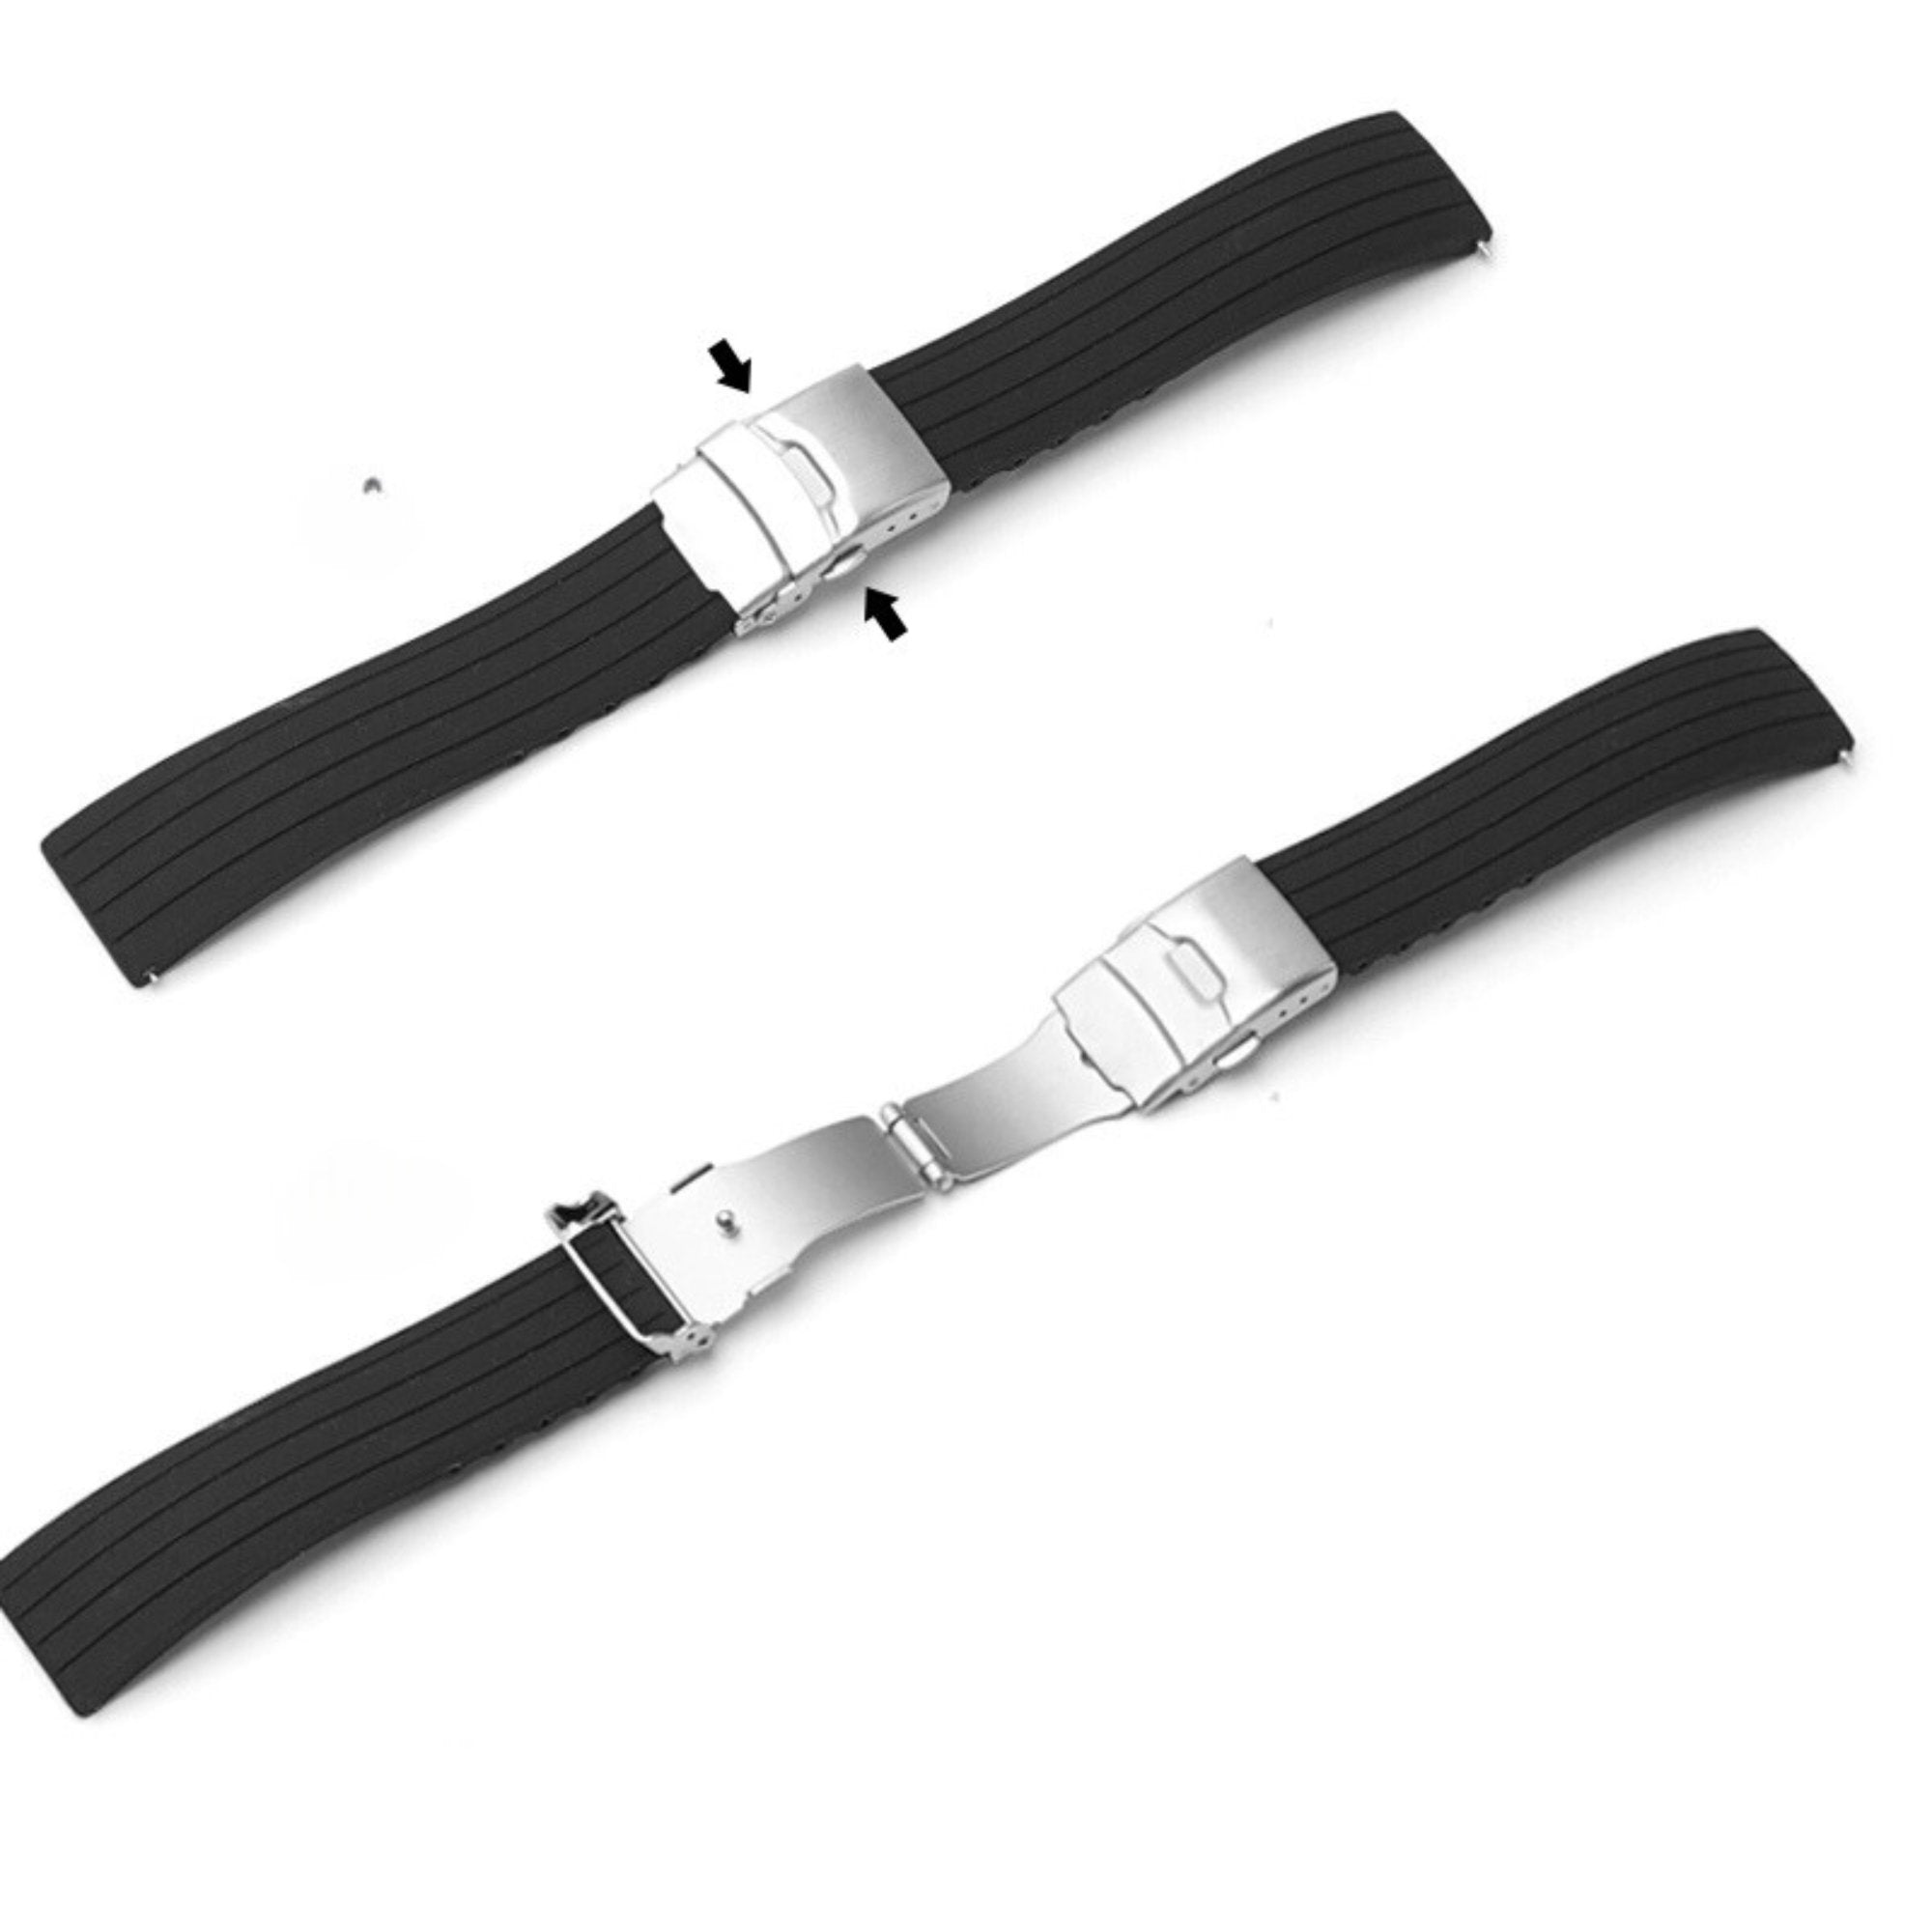 Stripe Cut-to-Length Soft Silicone Strap-Quick Release-Deployment Clasp-Bright Red -StrapSeeker